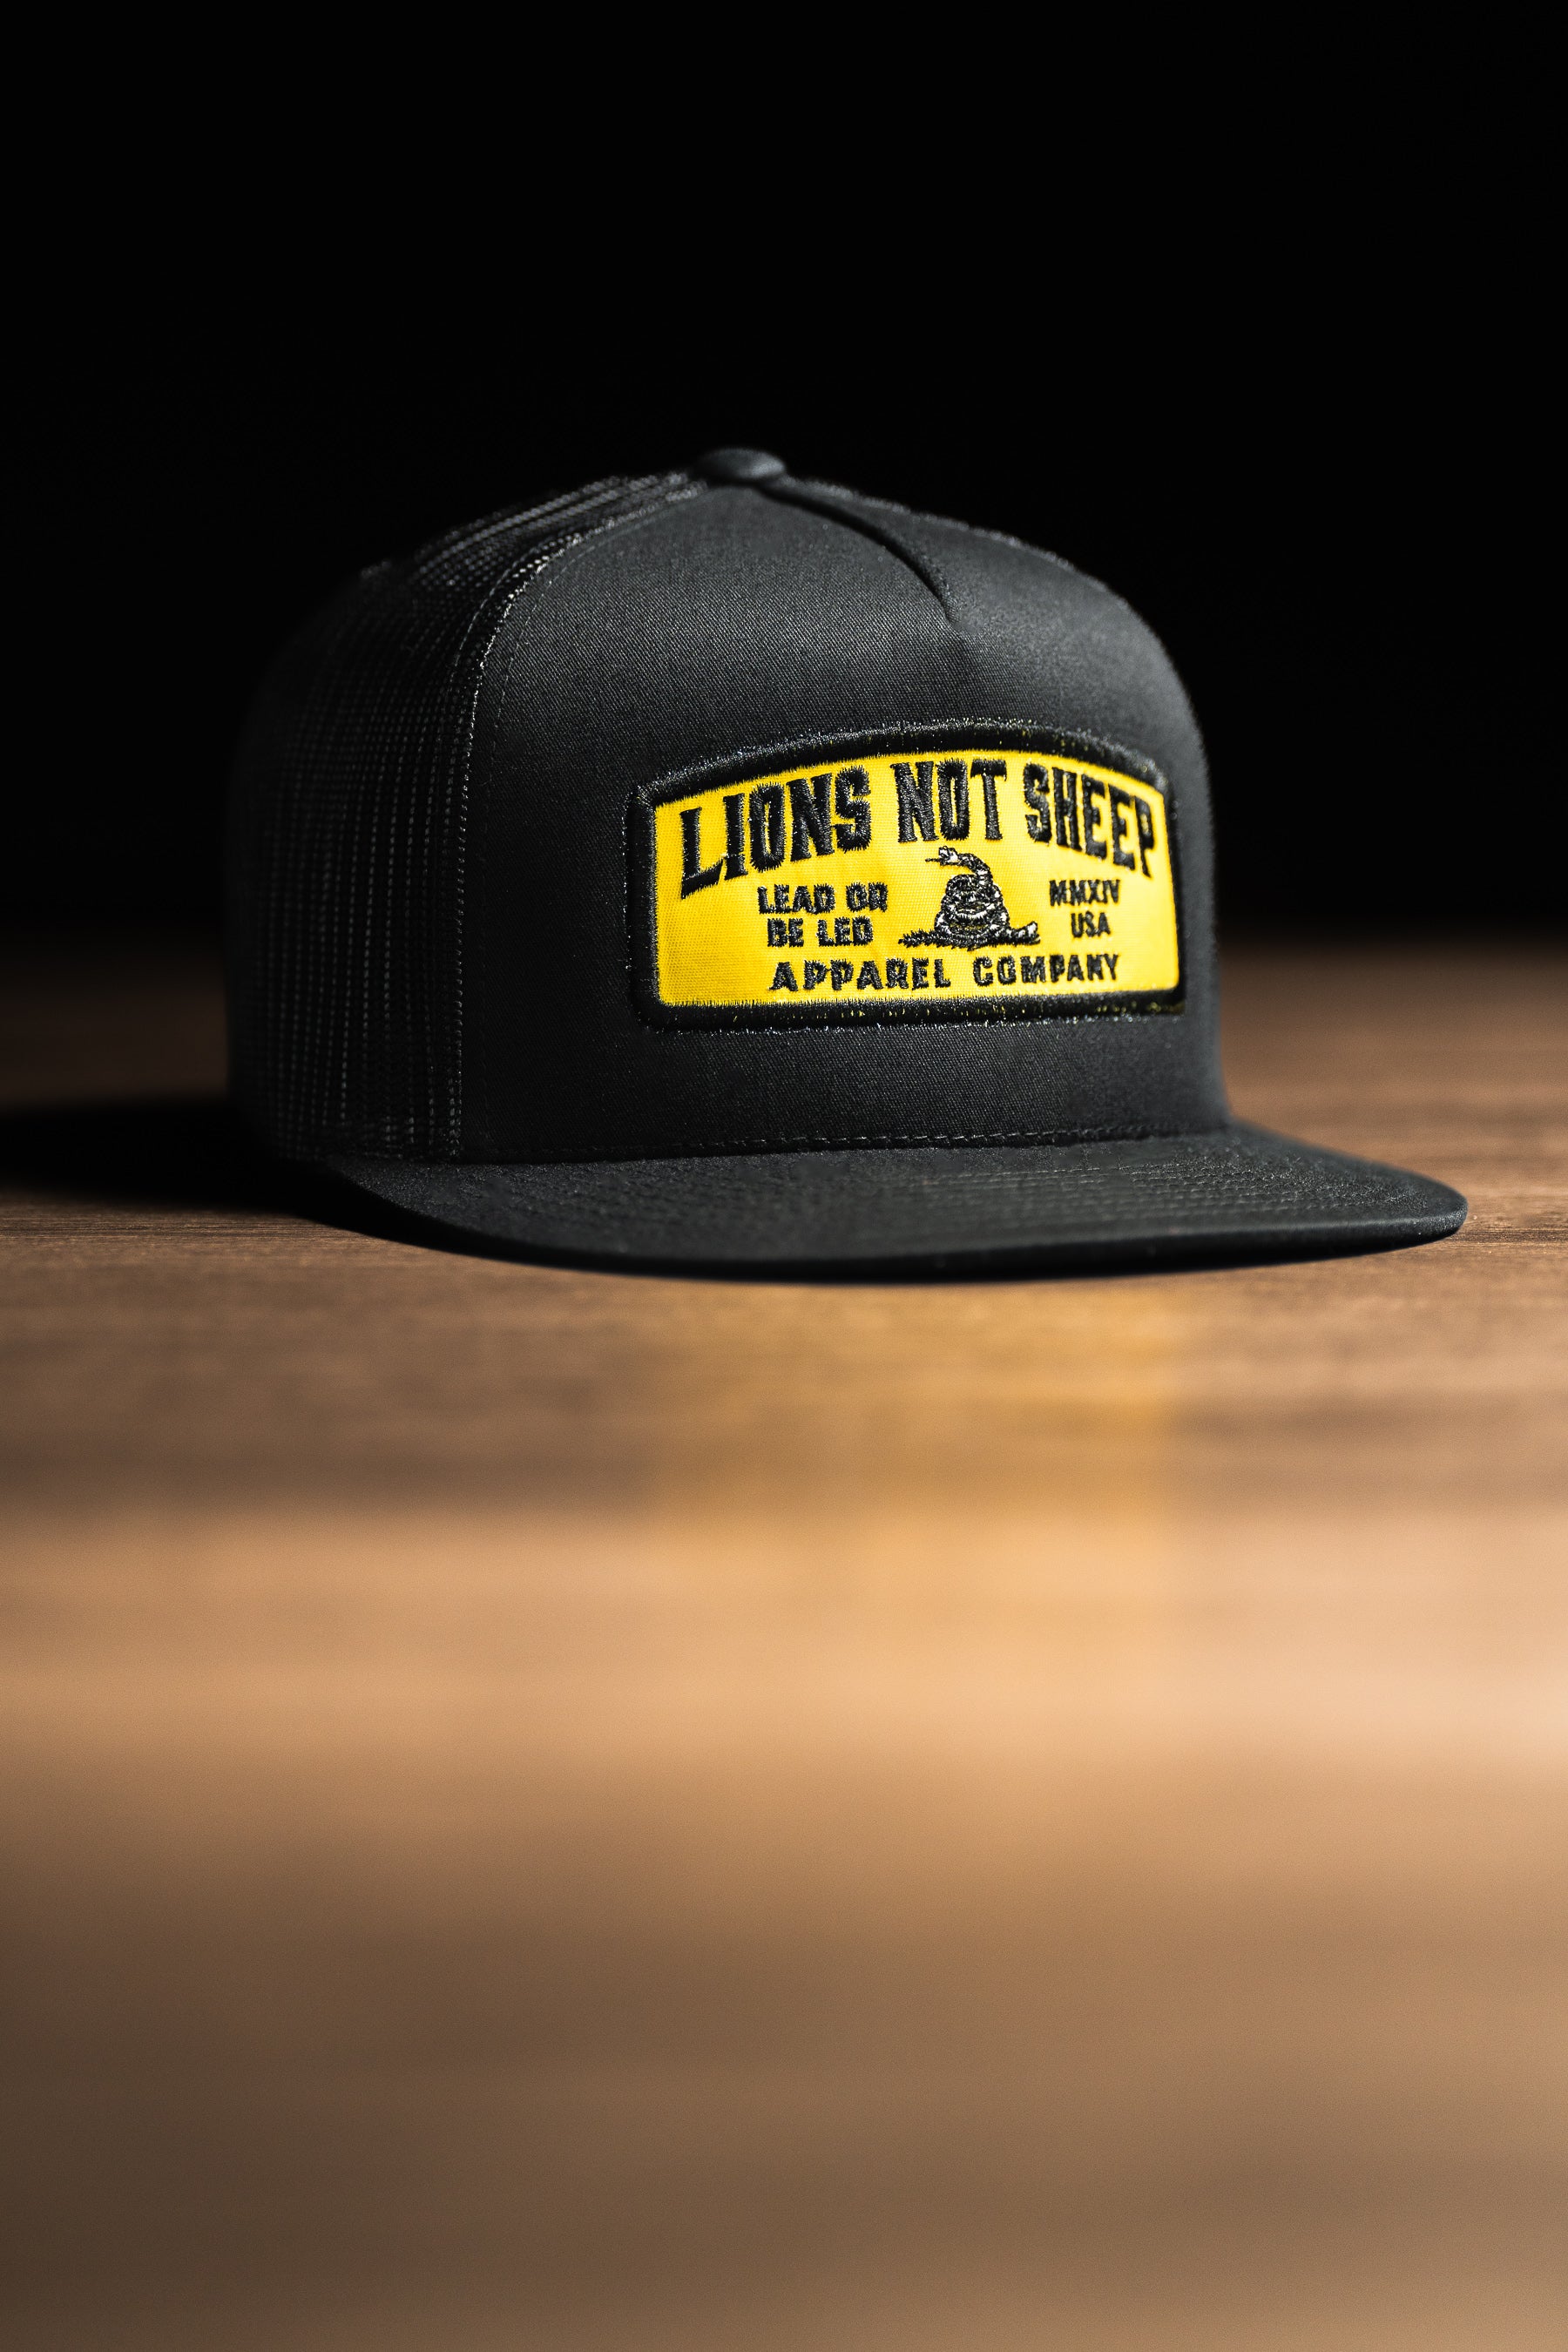 LEAD FROM THE FRONT Hat (Black/Yellow) - Lions Not Sheep ®